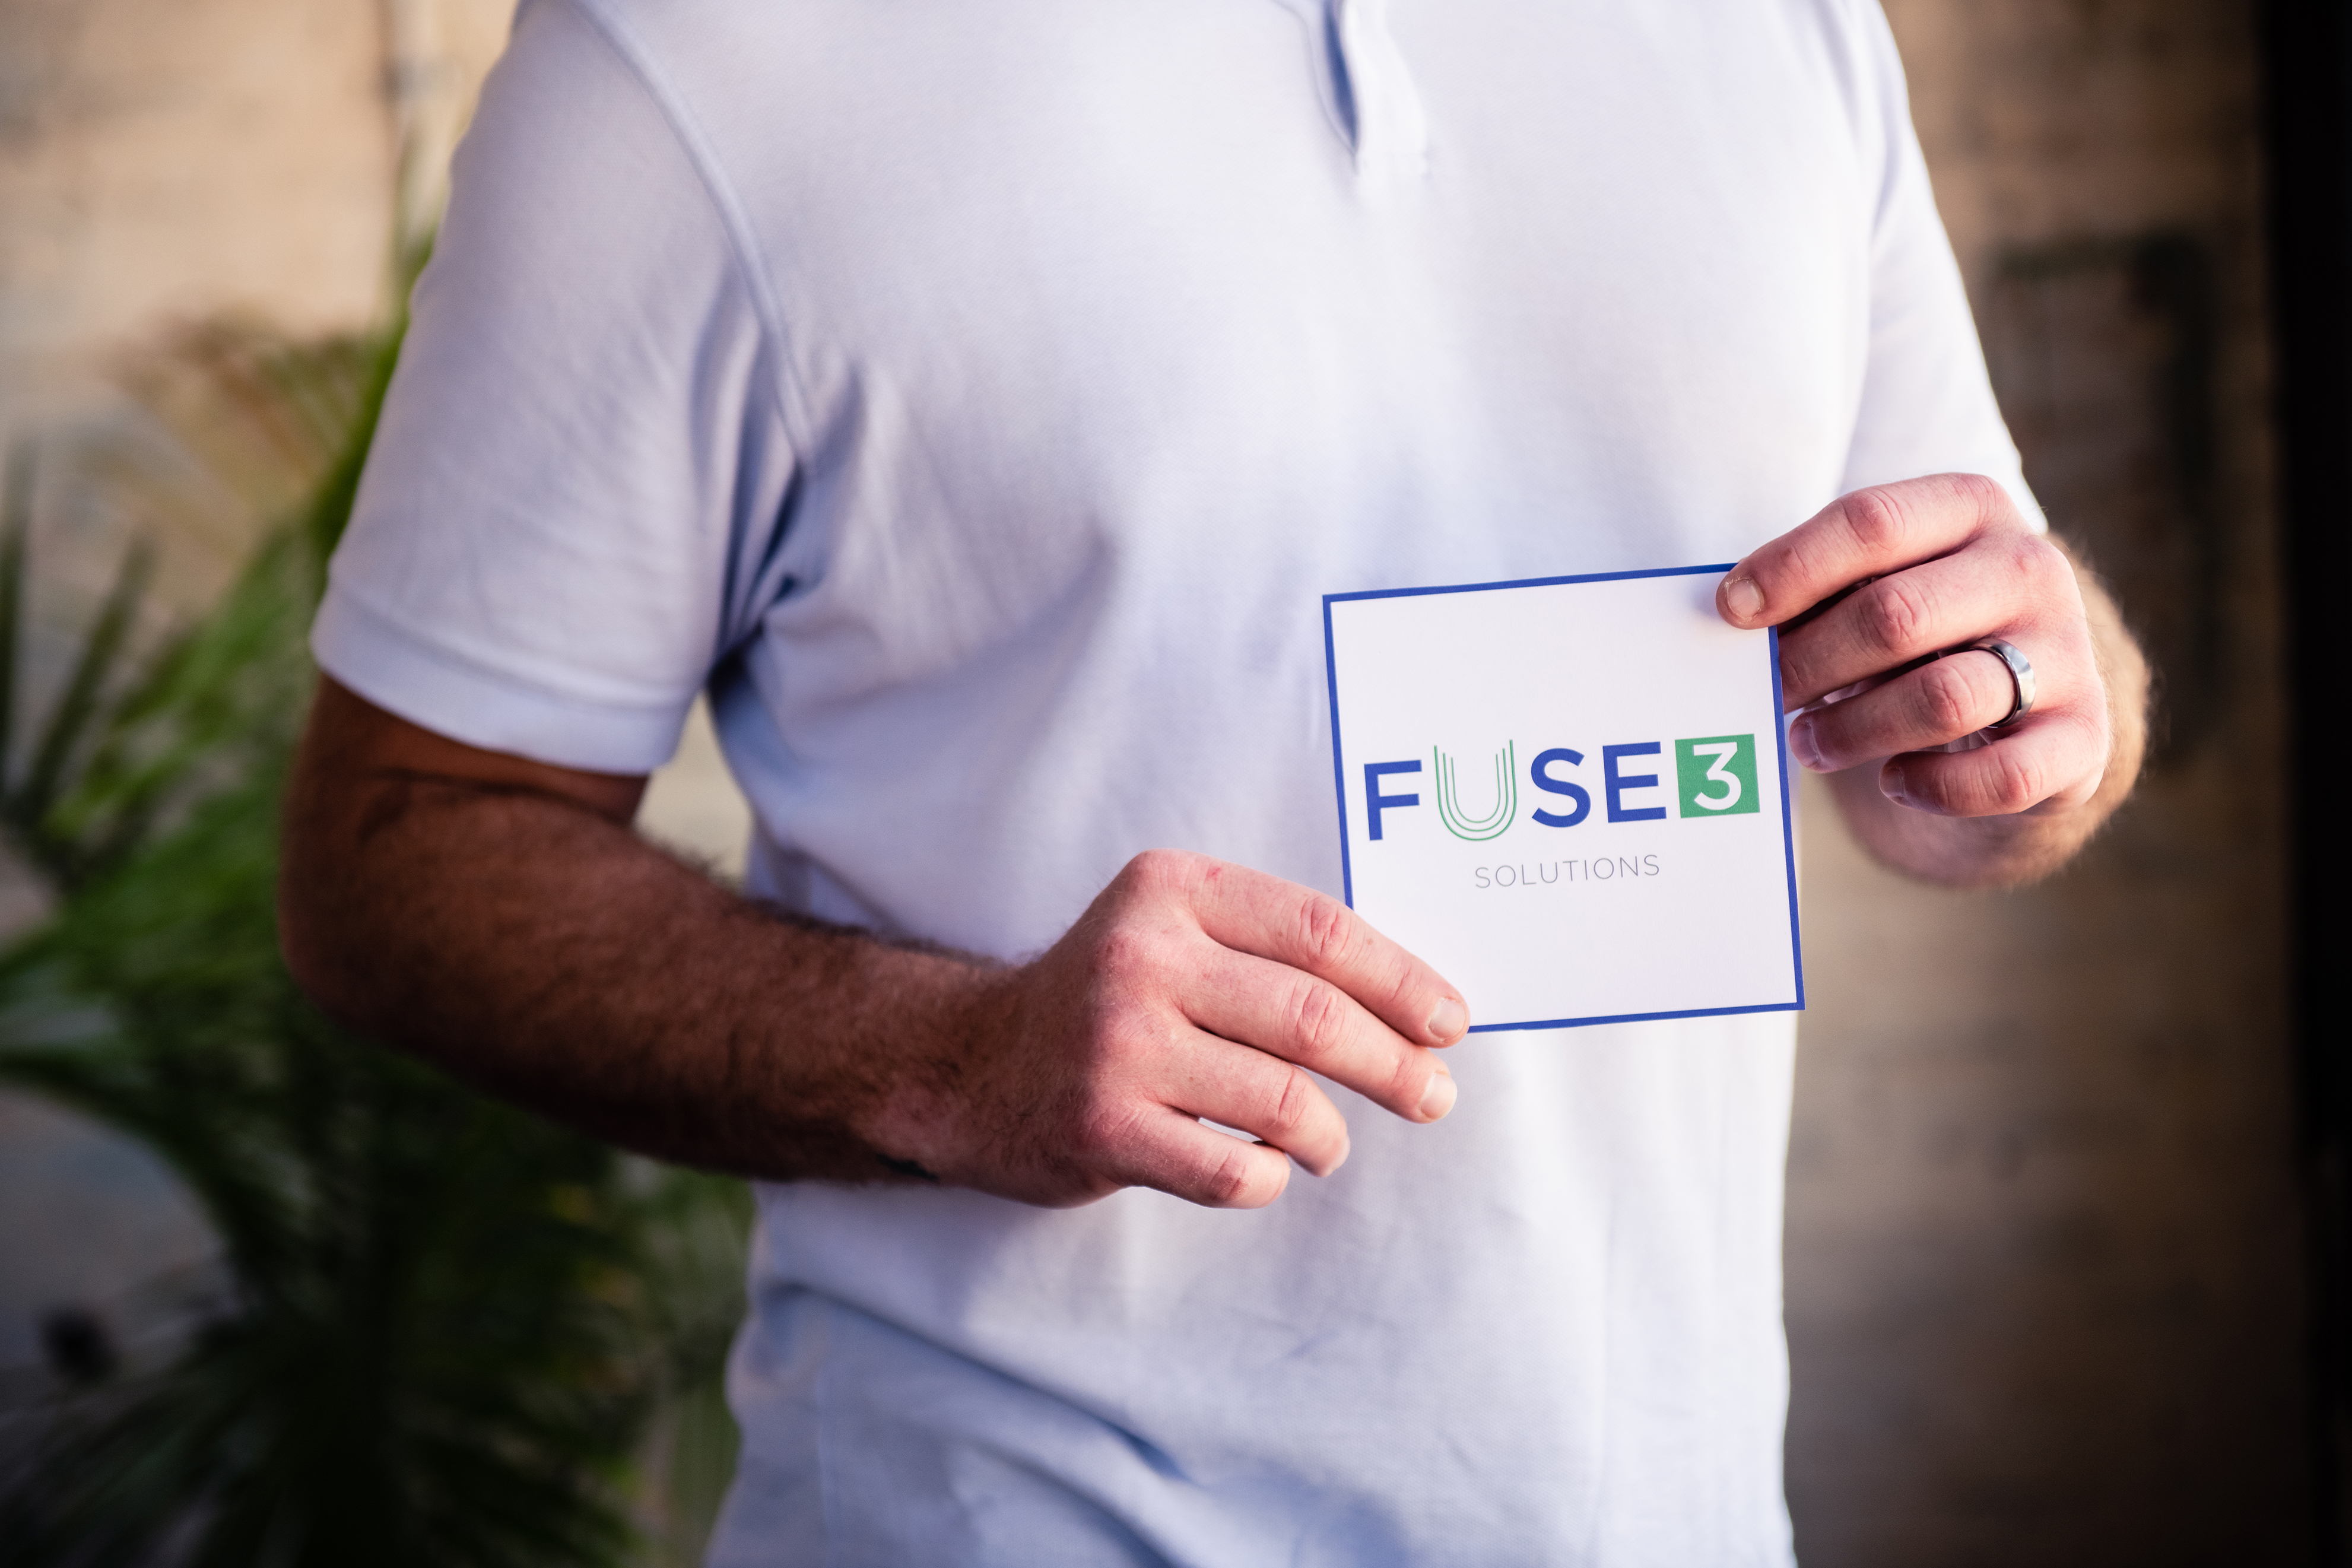 man holding card with Fuse3 Solutions logo printed